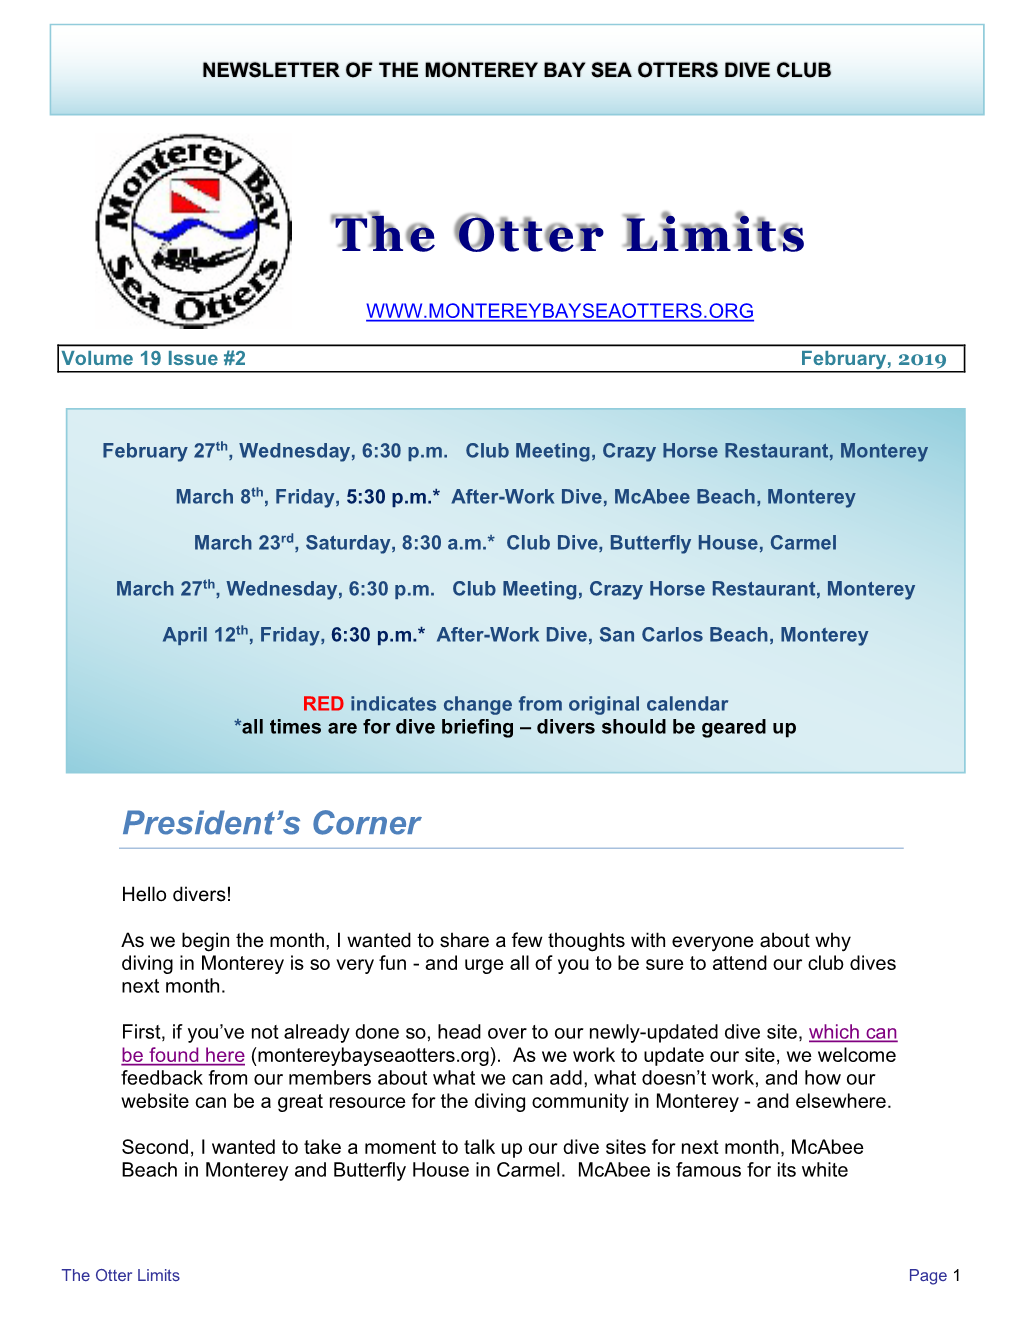 The Otter Limits